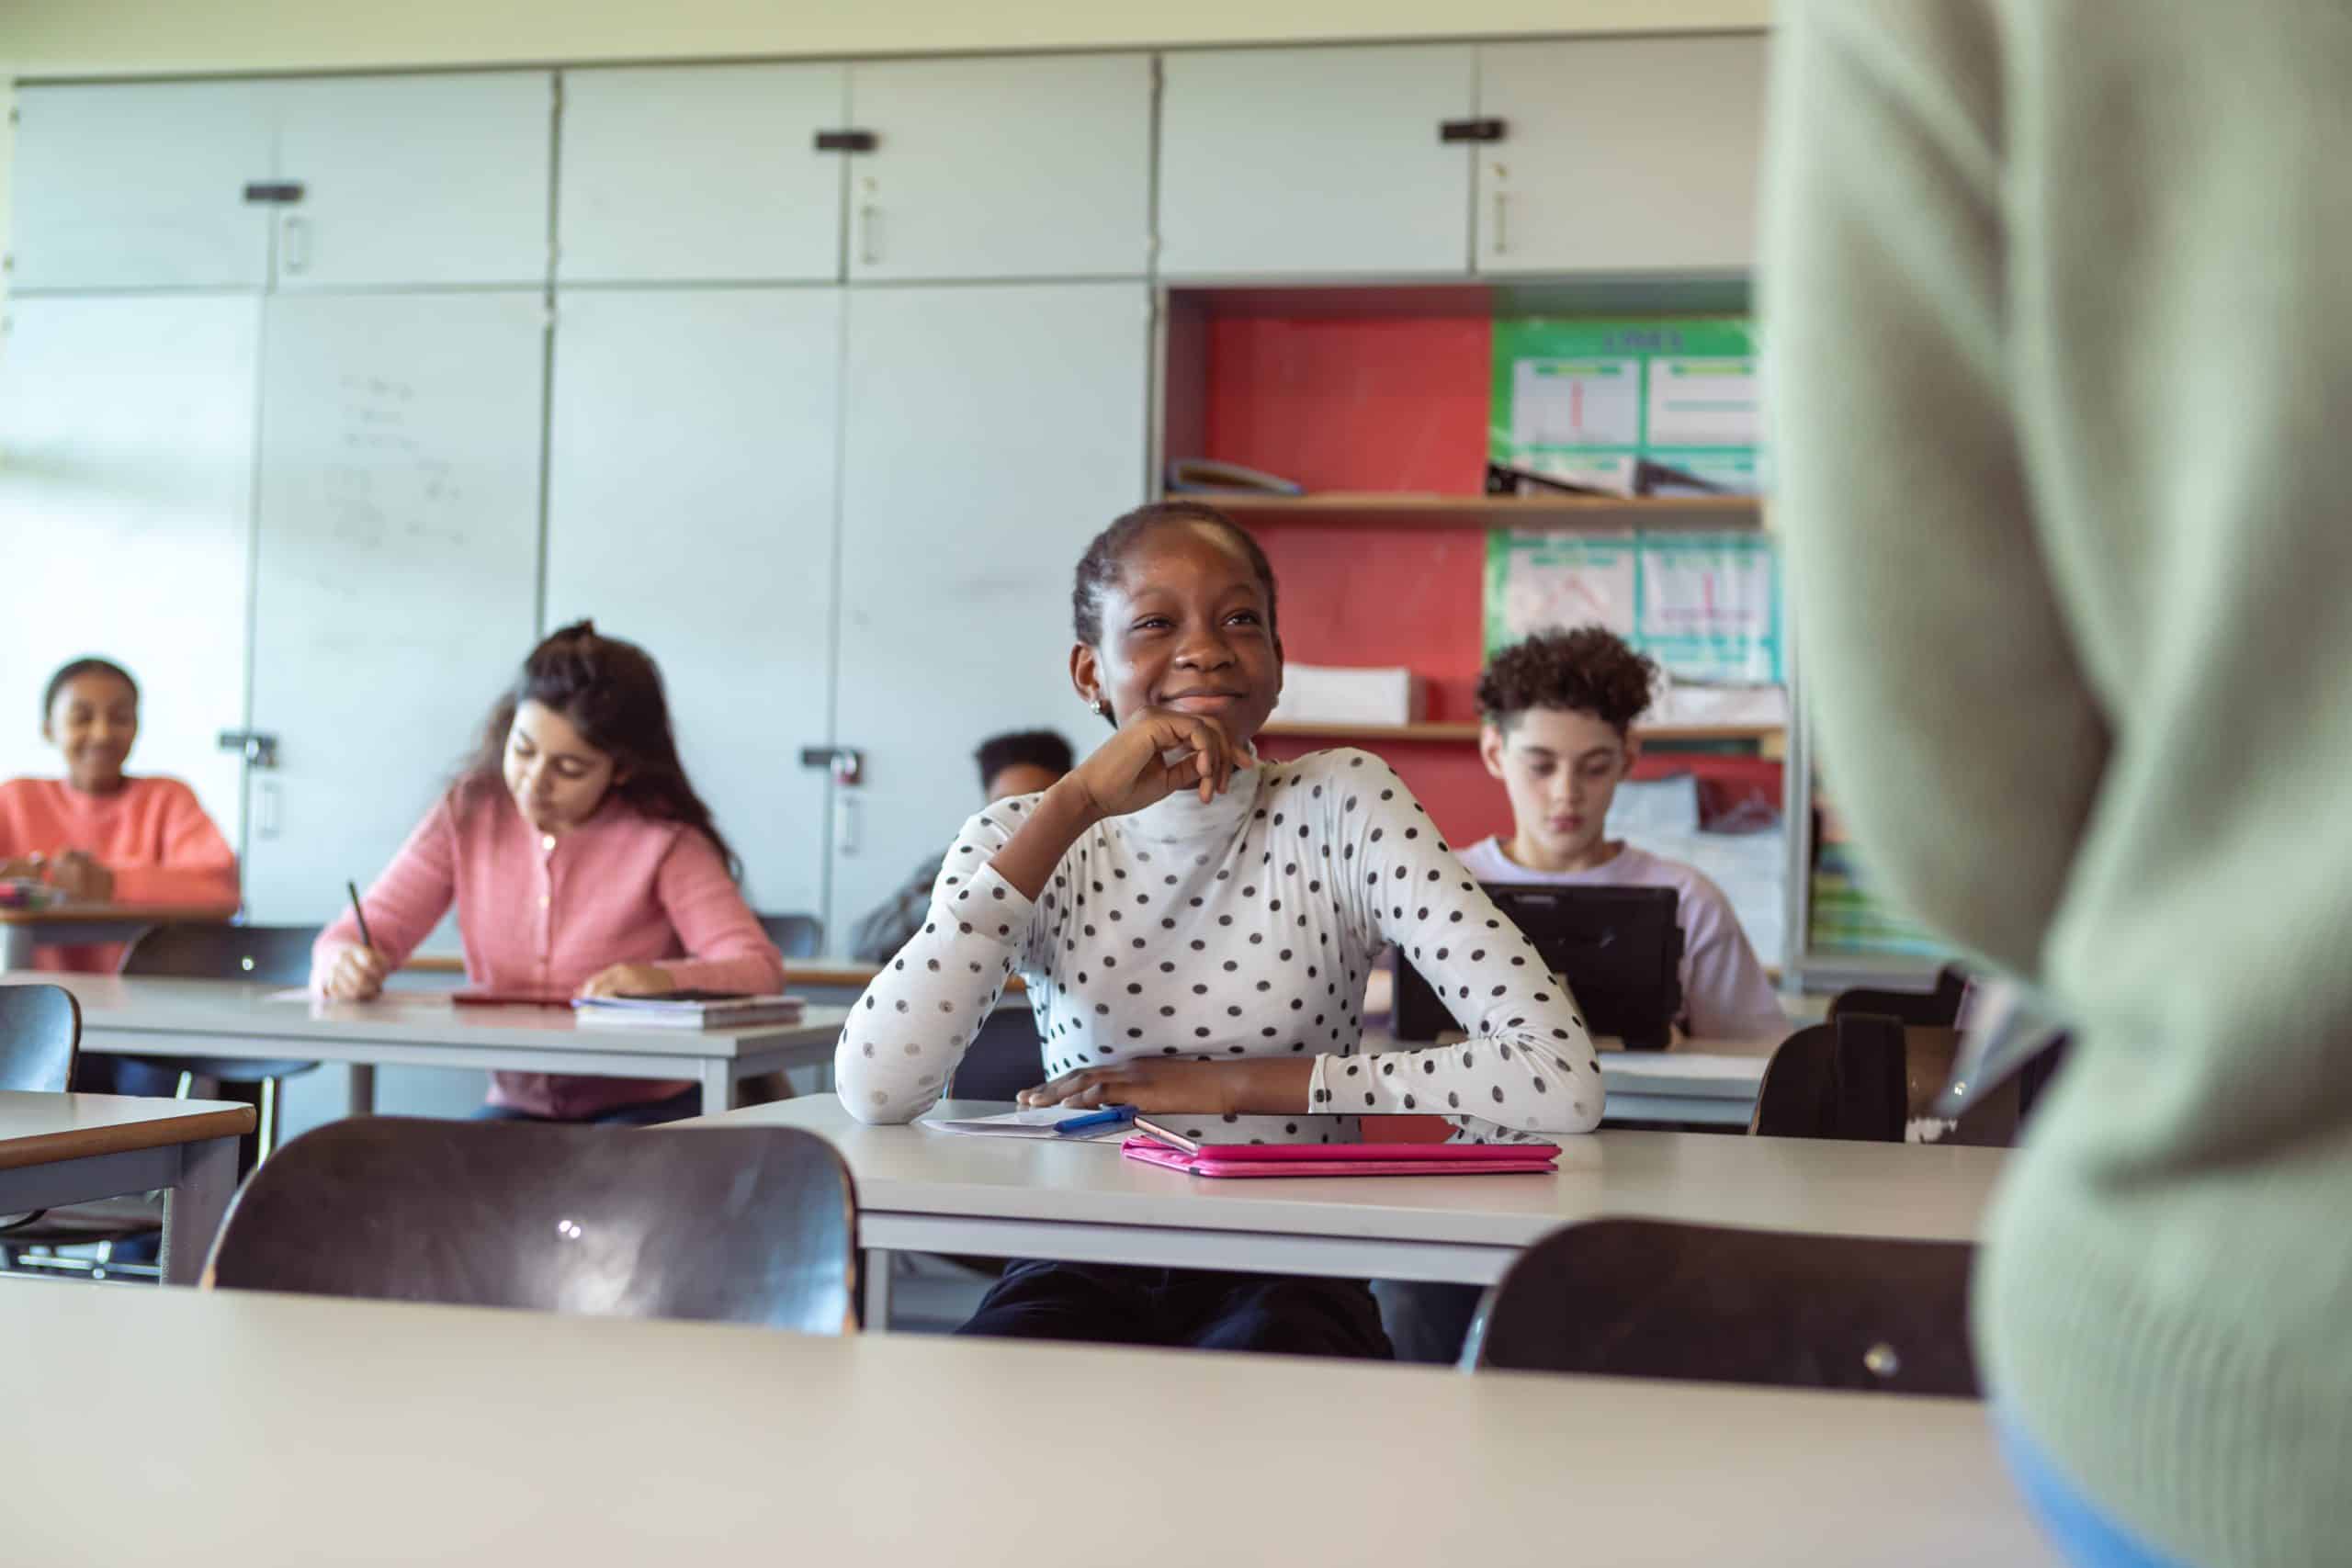 A multiracial group of students in elementary school sitting at desks take notes and listen as their teacher gives instructions during a class lecture. Selective focus on a cheerful black female students sitting at the front of the classroom.